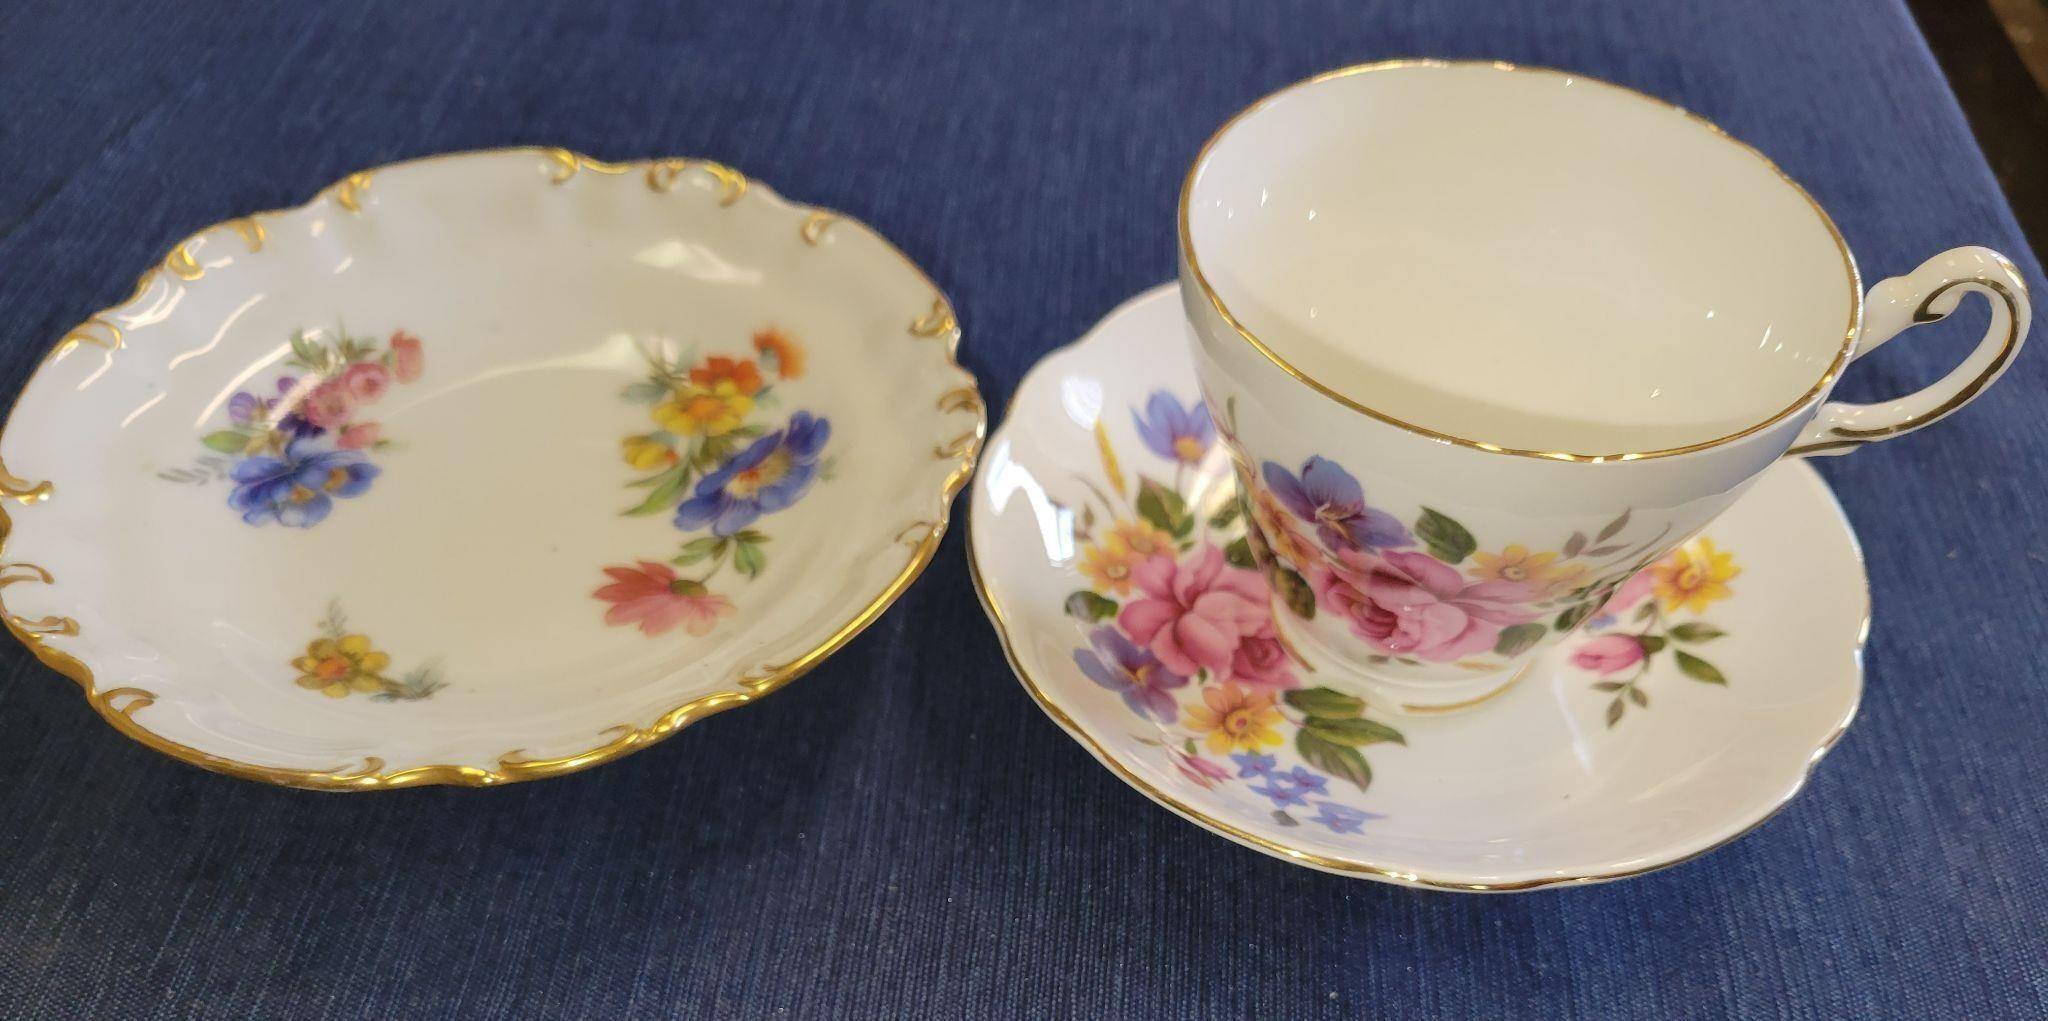 Bone China Teacup and Saucer, and Matching Plate